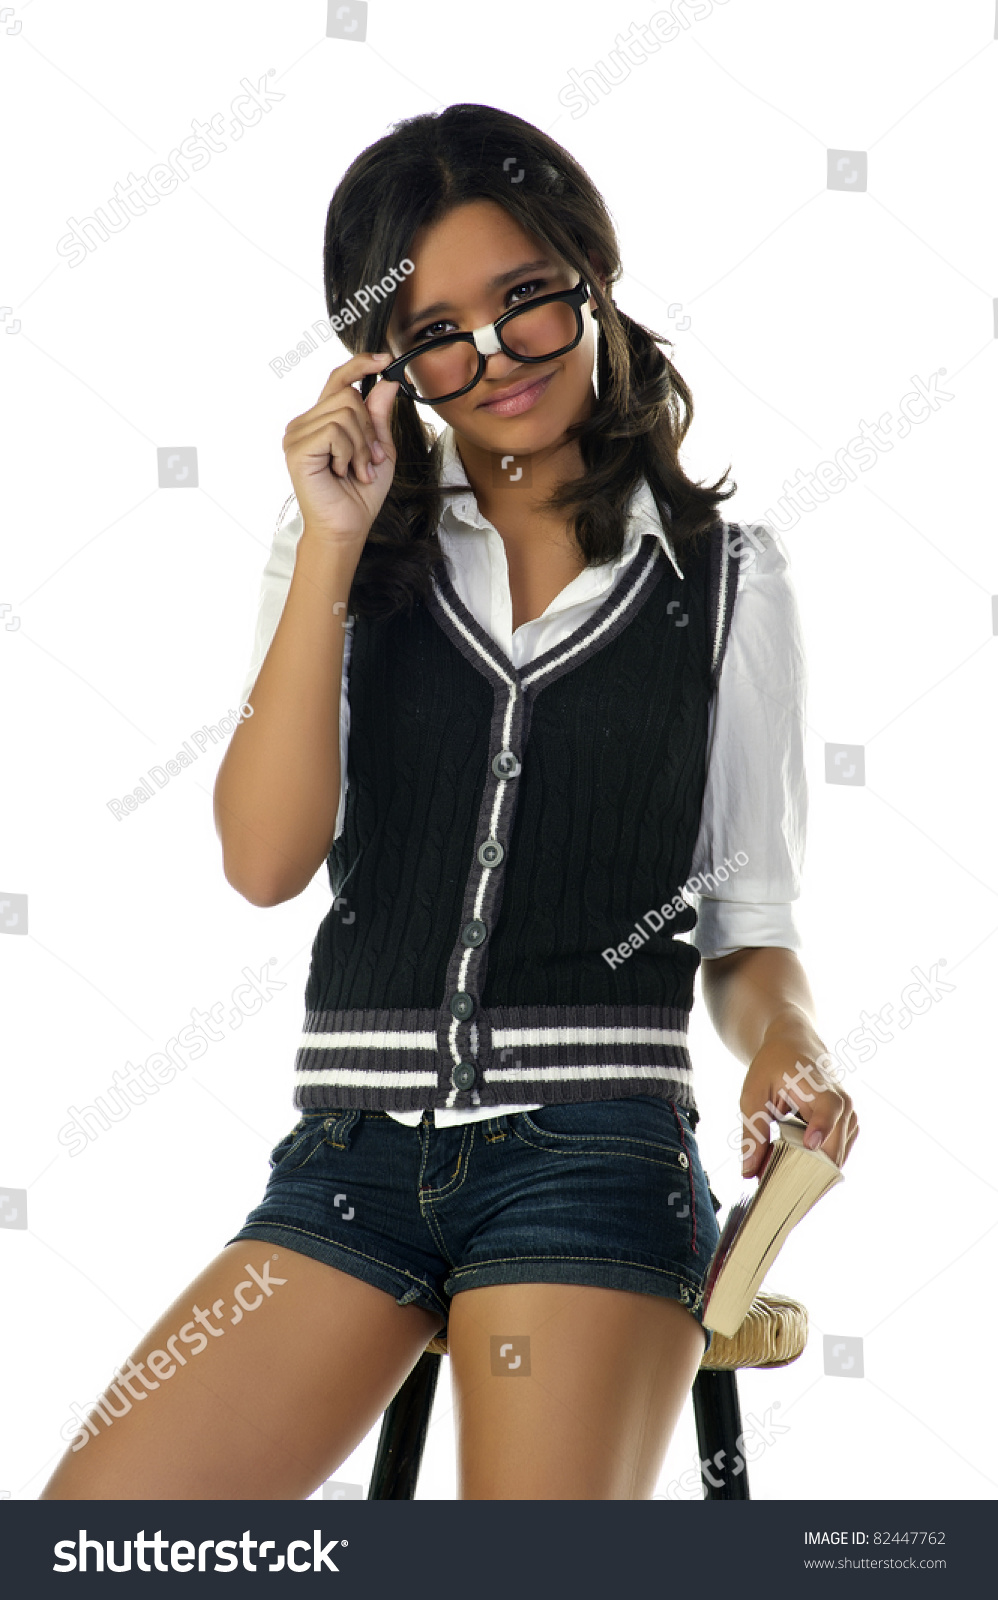 Teenage Nerd Girl With Black Glasses Sticking Out Her